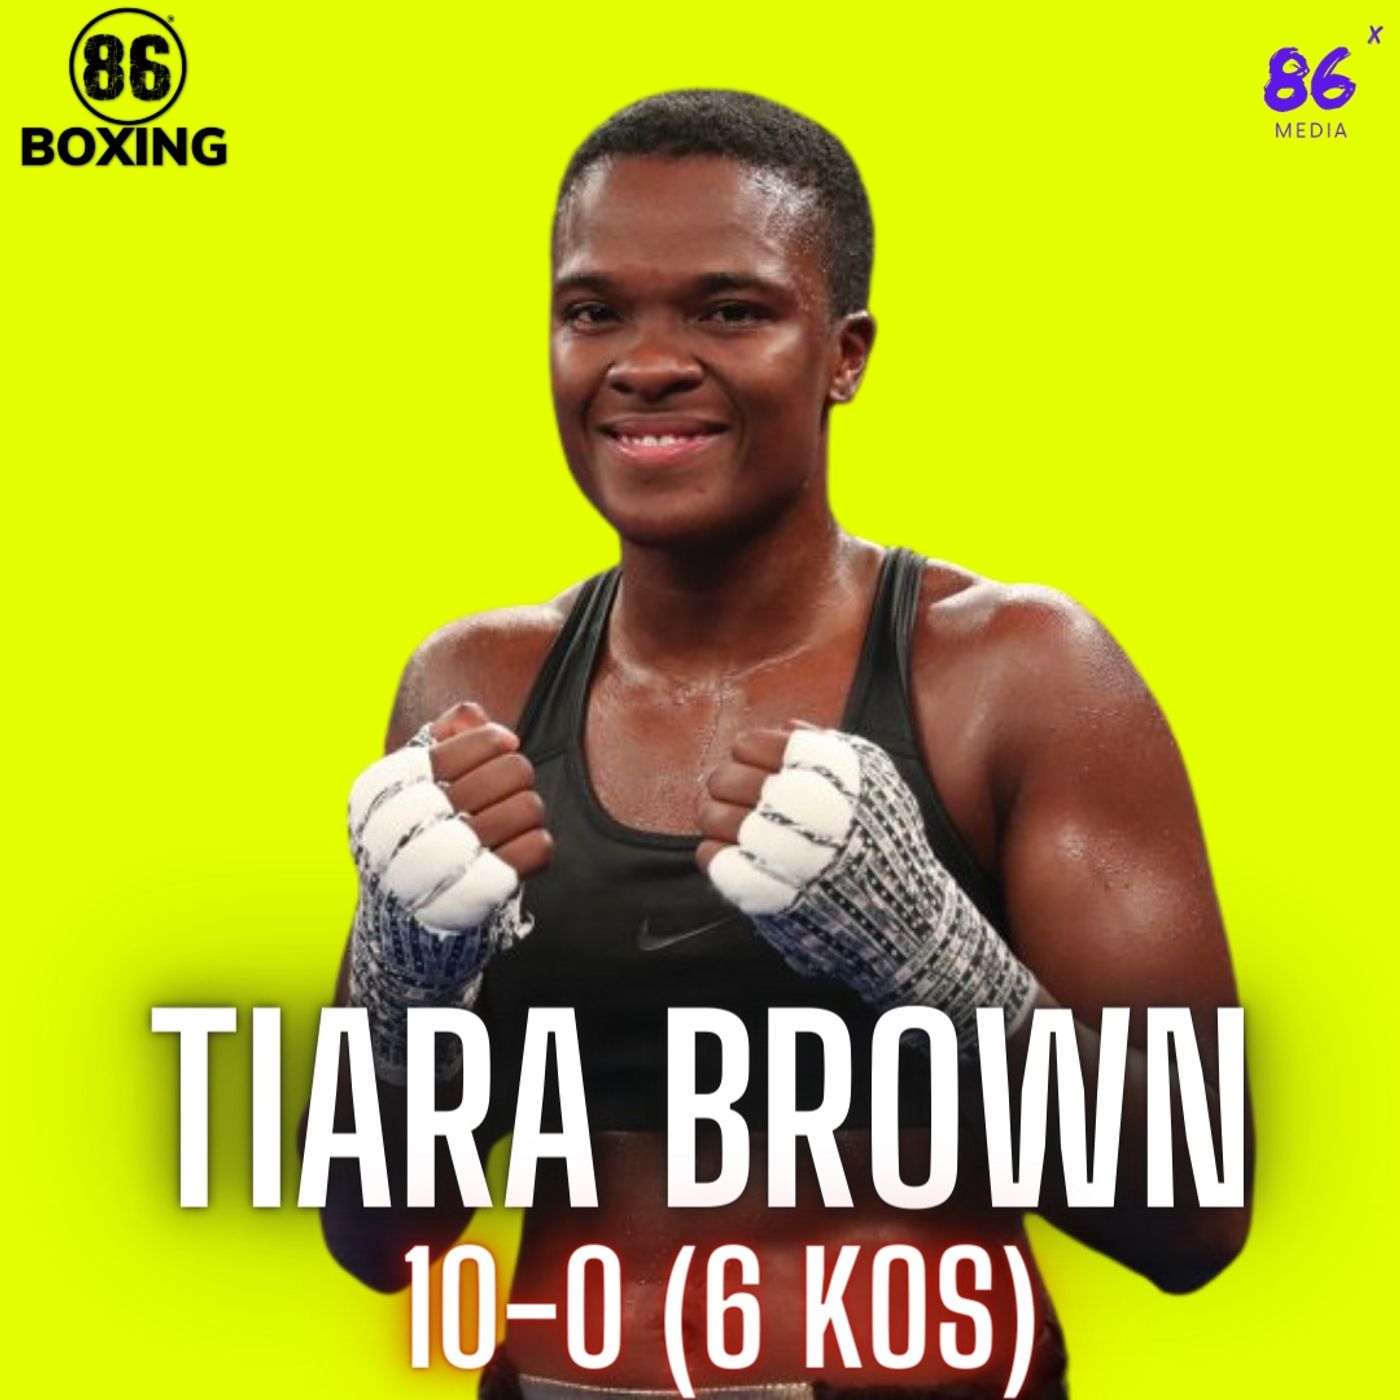 86Boxing E28: Tiara Brown - Exclusive Interview on Boxing, Life, Spirit, DC, Florida, & Community #86boxing